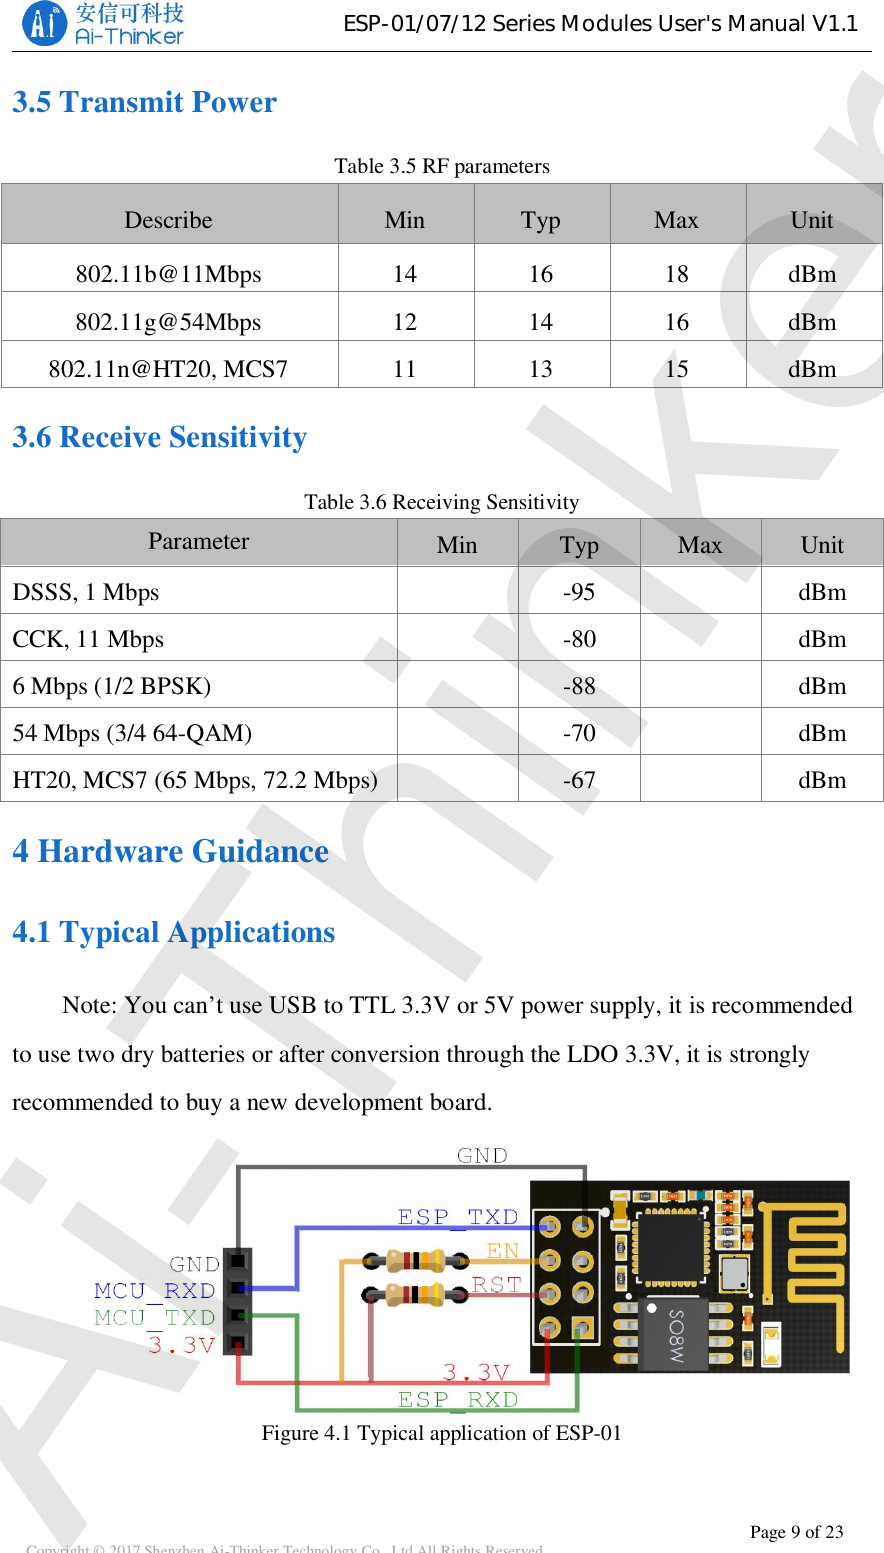 ESP-01/07/12SeriesModulesUser&apos;sManualV1.1Copyright © 2017 Shenzhen Ai-Thinker Technology Co., Ltd All Rights Reserved Page 9 of 233.5 Transmit PowerTable 3.5 RF parametersDescribe Min Typ Max Unit802.11b@11Mbps 14 16 18 dBm802.11g@54Mbps 12 14 16 dBm802.11n@HT20, MCS7 11 13 15 dBm3.6 Receive SensitivityTable 3.6 Receiving SensitivityParameter Min Typ Max UnitDSSS, 1 Mbps -95 dBmCCK, 11 Mbps -80 dBm6 Mbps (1/2 BPSK) -88 dBm54 Mbps (3/4 64-QAM) -70 dBmHT20, MCS7 (65 Mbps, 72.2 Mbps) -67 dBm4 Hardware Guidance4.1 Typical ApplicationsNote: You can’t use USB to TTL 3.3V or 5V power supply, it is recommendedto use two dry batteries or after conversion through the LDO 3.3V, it is stronglyrecommended to buy a new development board.Figure 4.1 Typical application of ESP-01Ai-Thinker